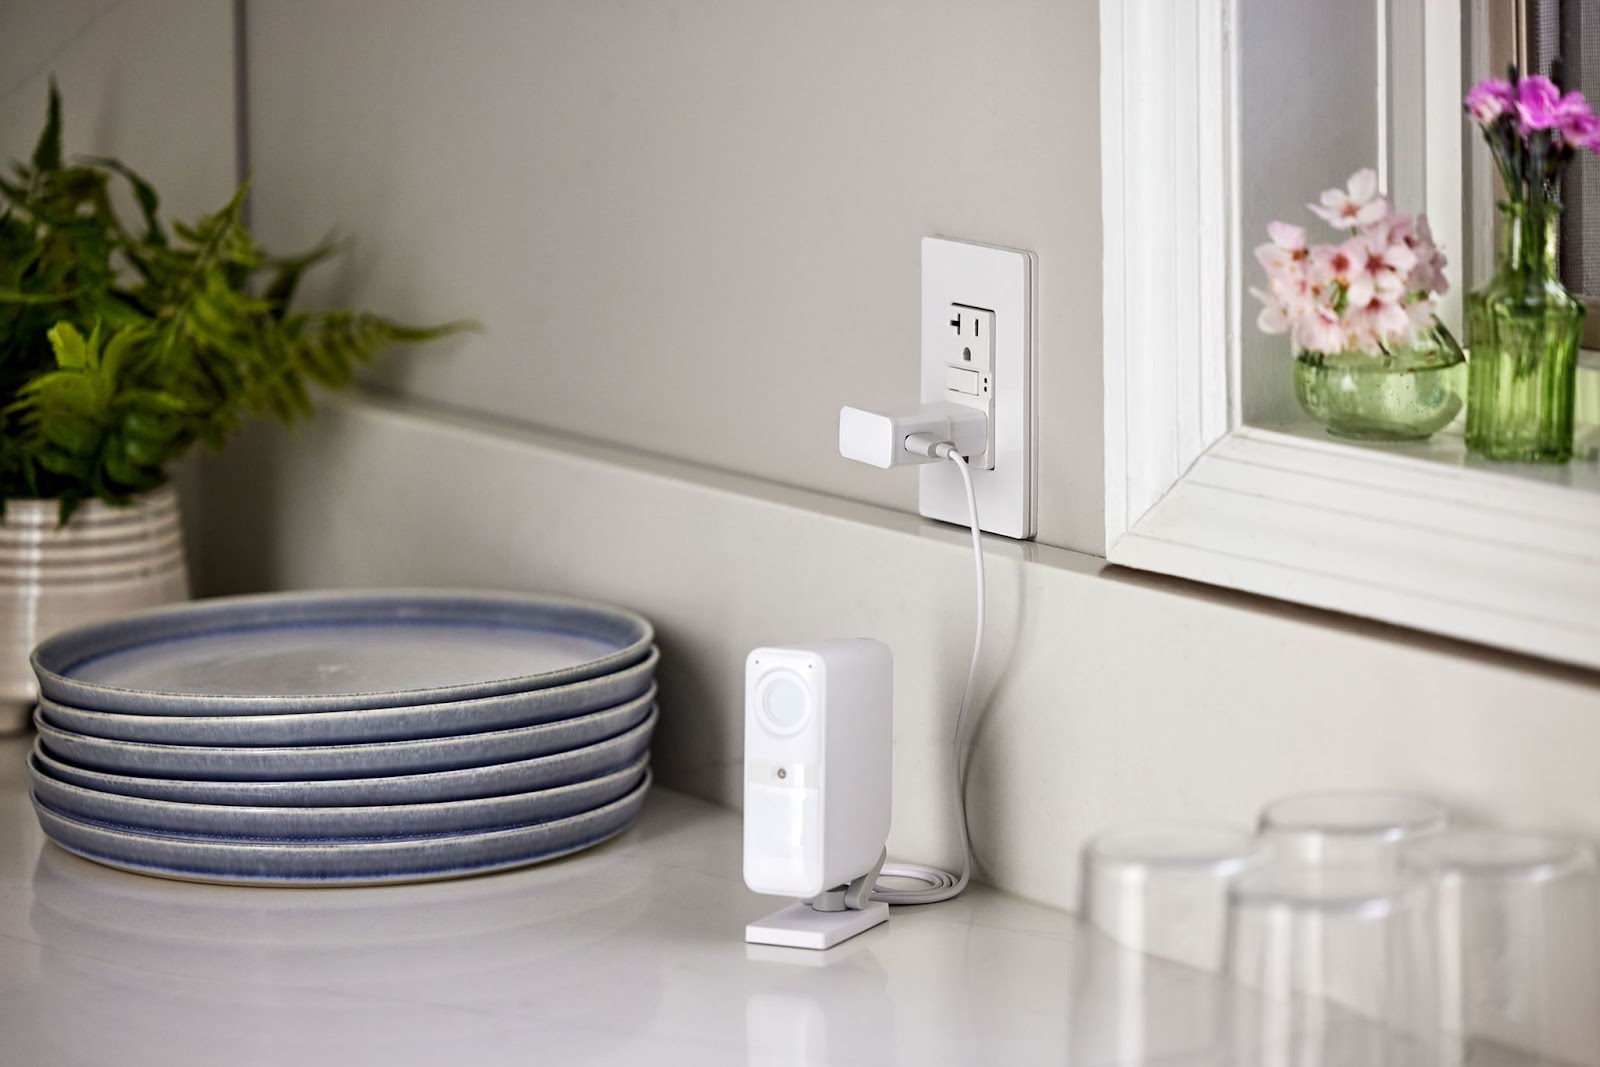 Smart Alarm Indoor Camera plugged into wall outlet on kitchen counter.